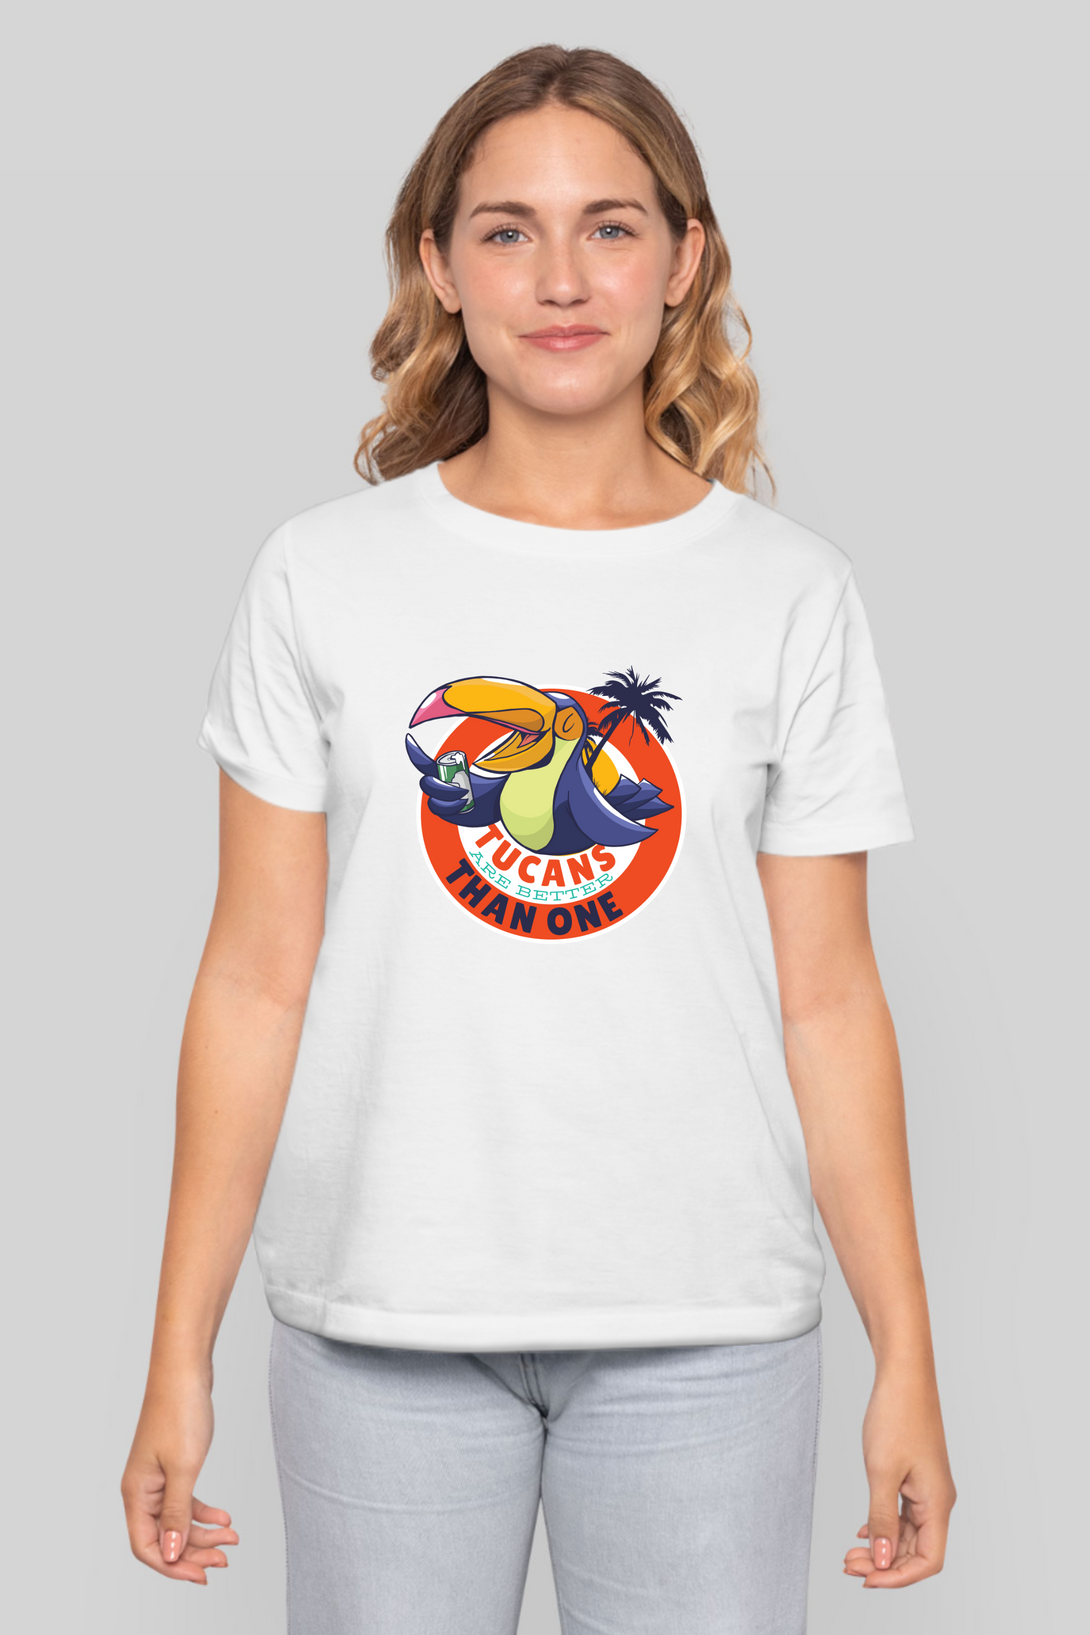 Tucans Are Better Tha One Printed T-Shirt For Women - WowWaves - 12